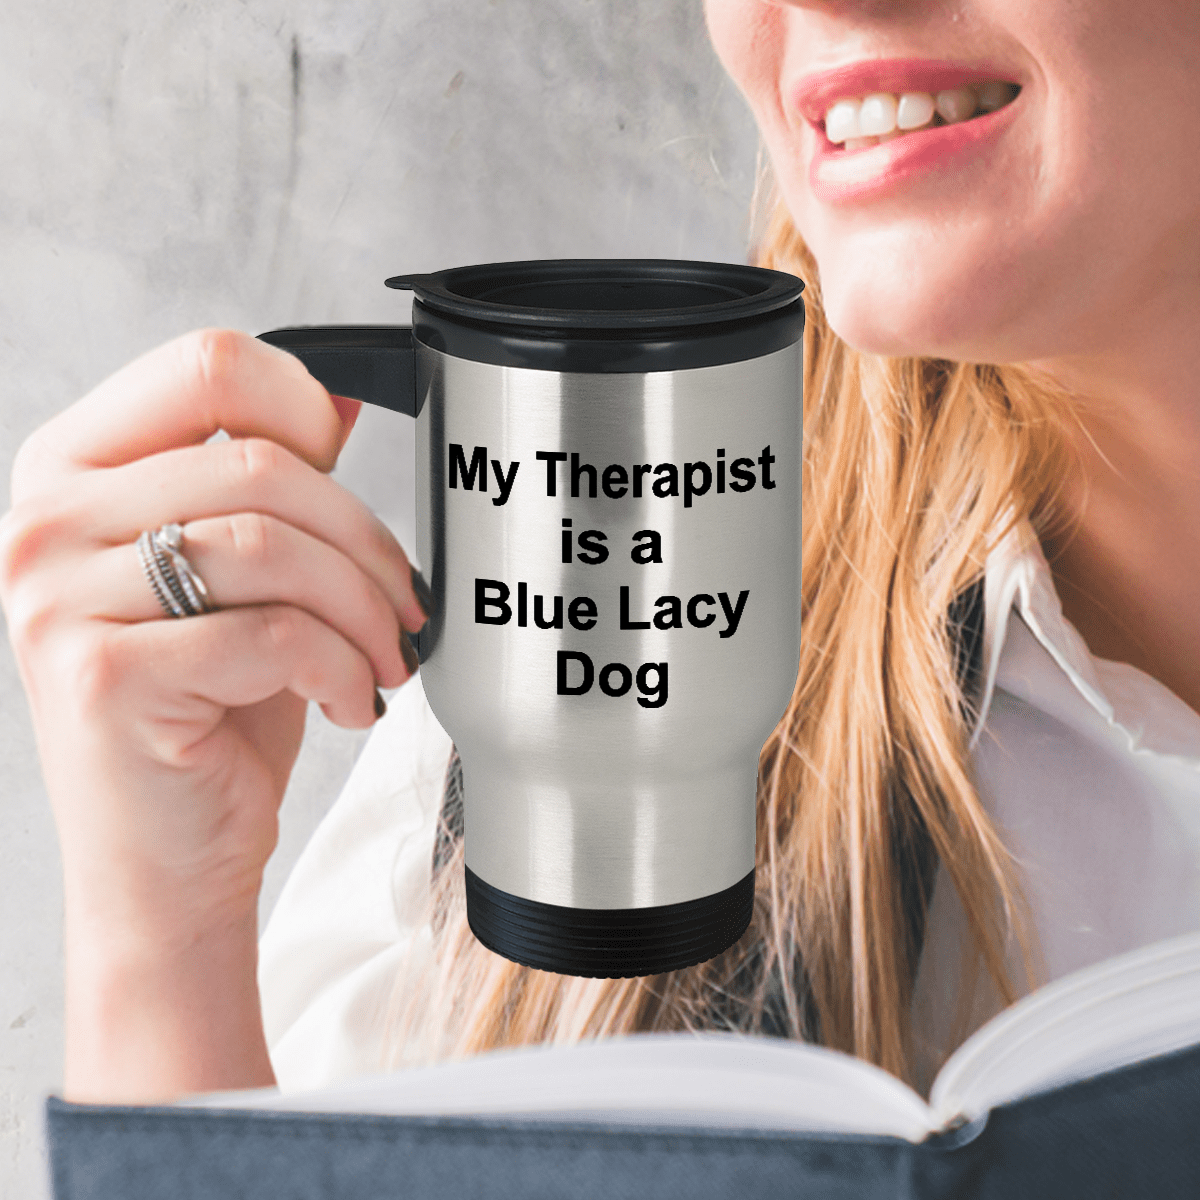 Blue Lacy Dog Owner Lover Funny Gift Therapist Stainless Steel Insulated Travel Coffee Mug